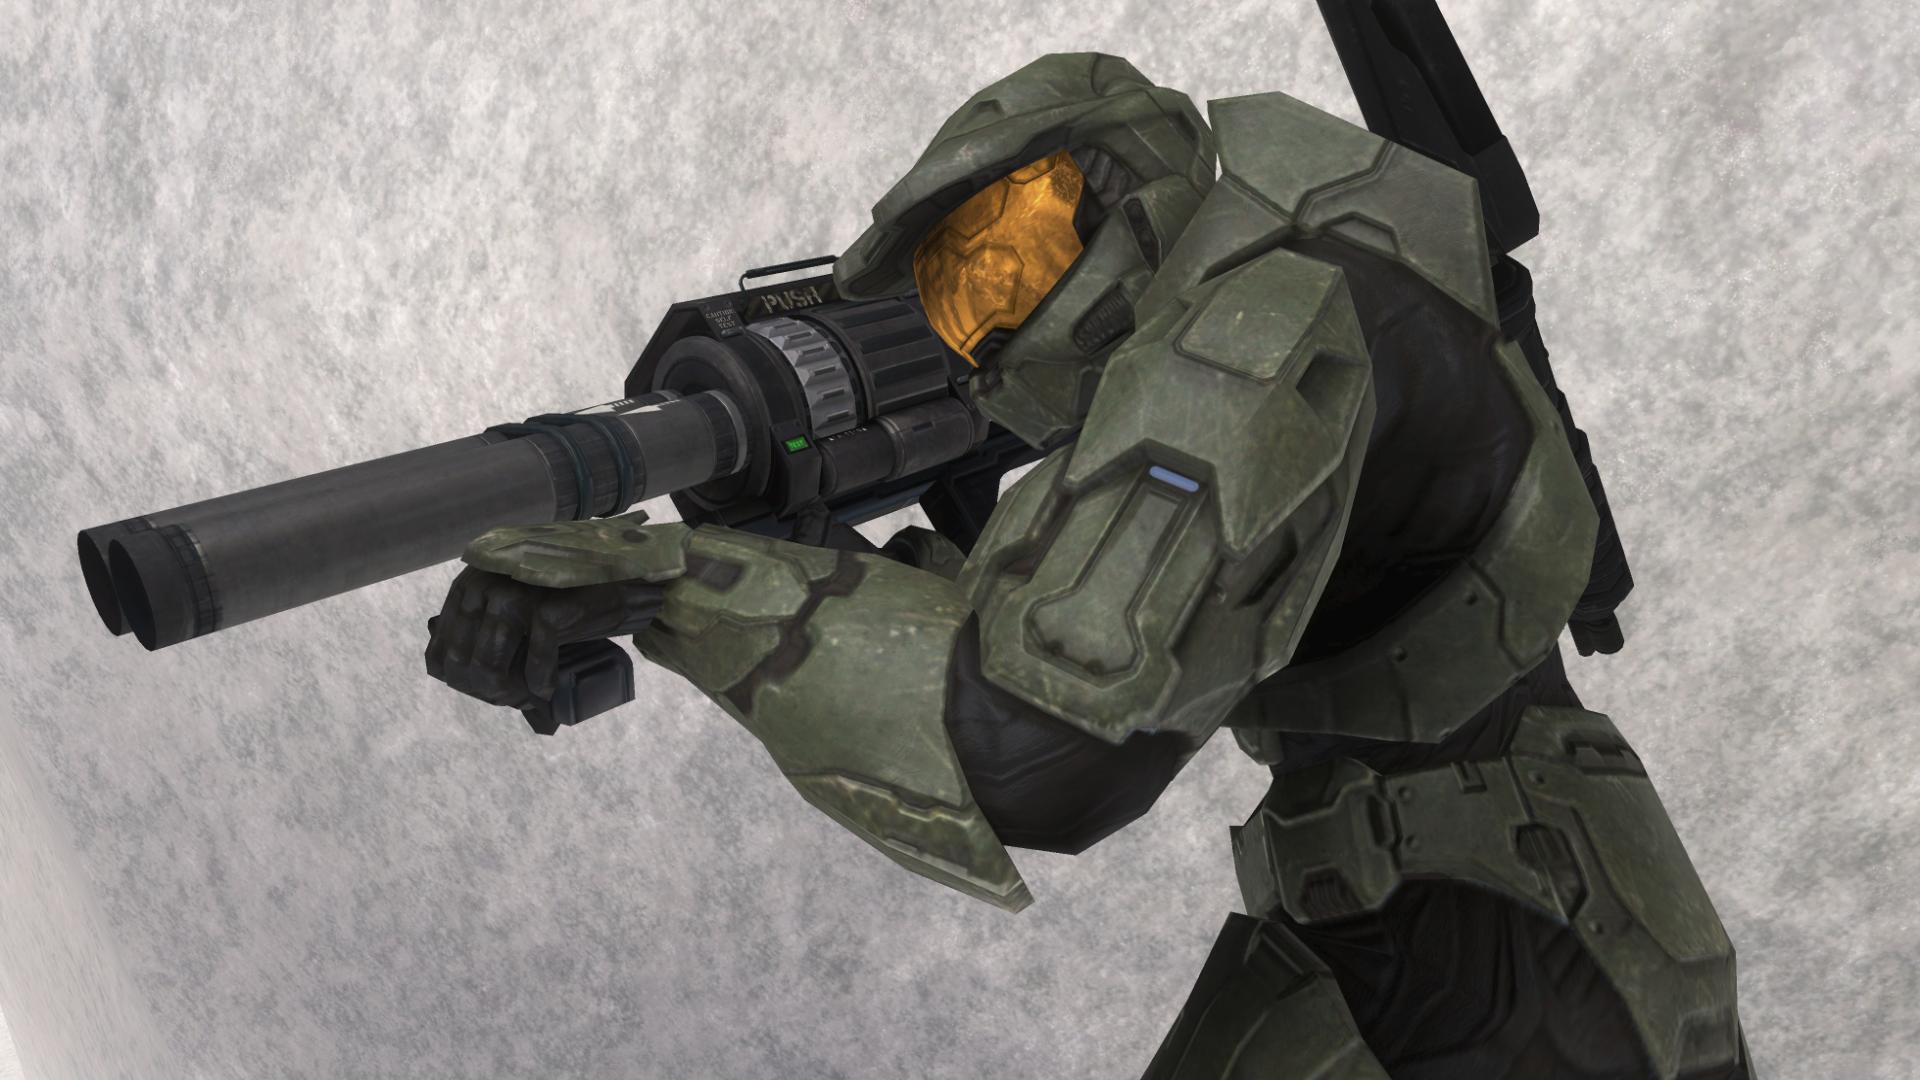 an animated image of a character from halo